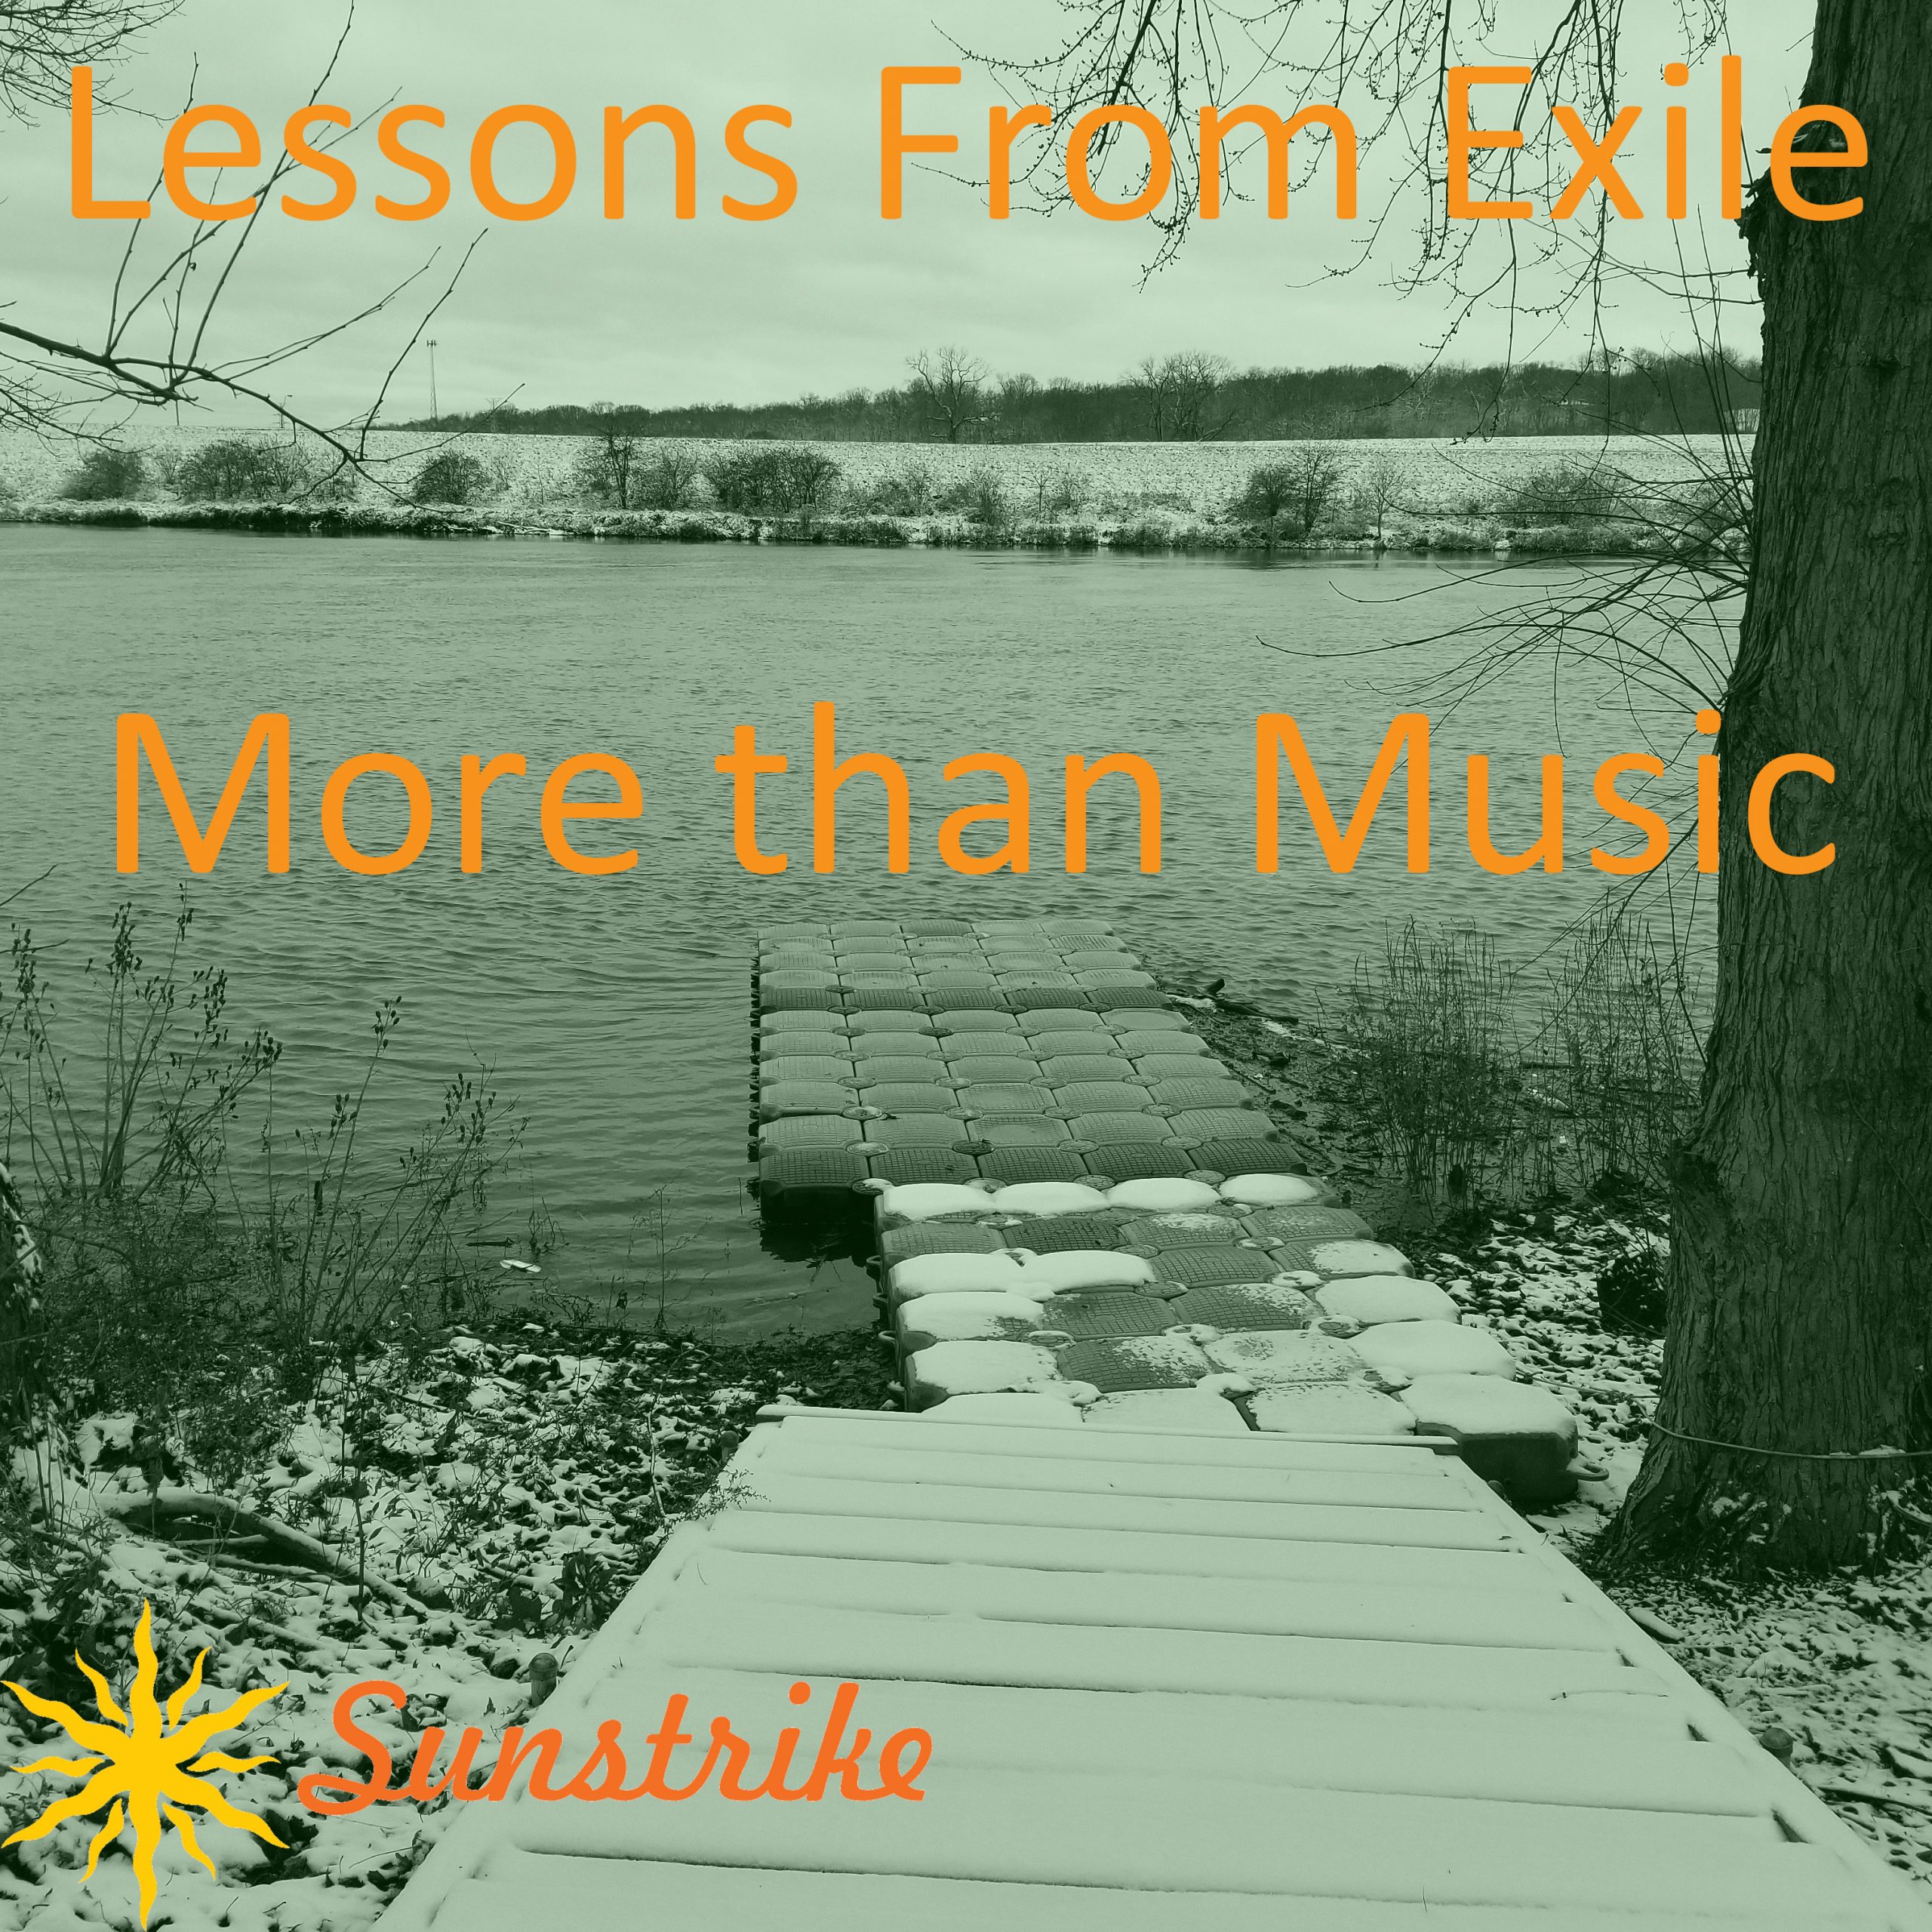 Lessons from Exile #96: More than Music